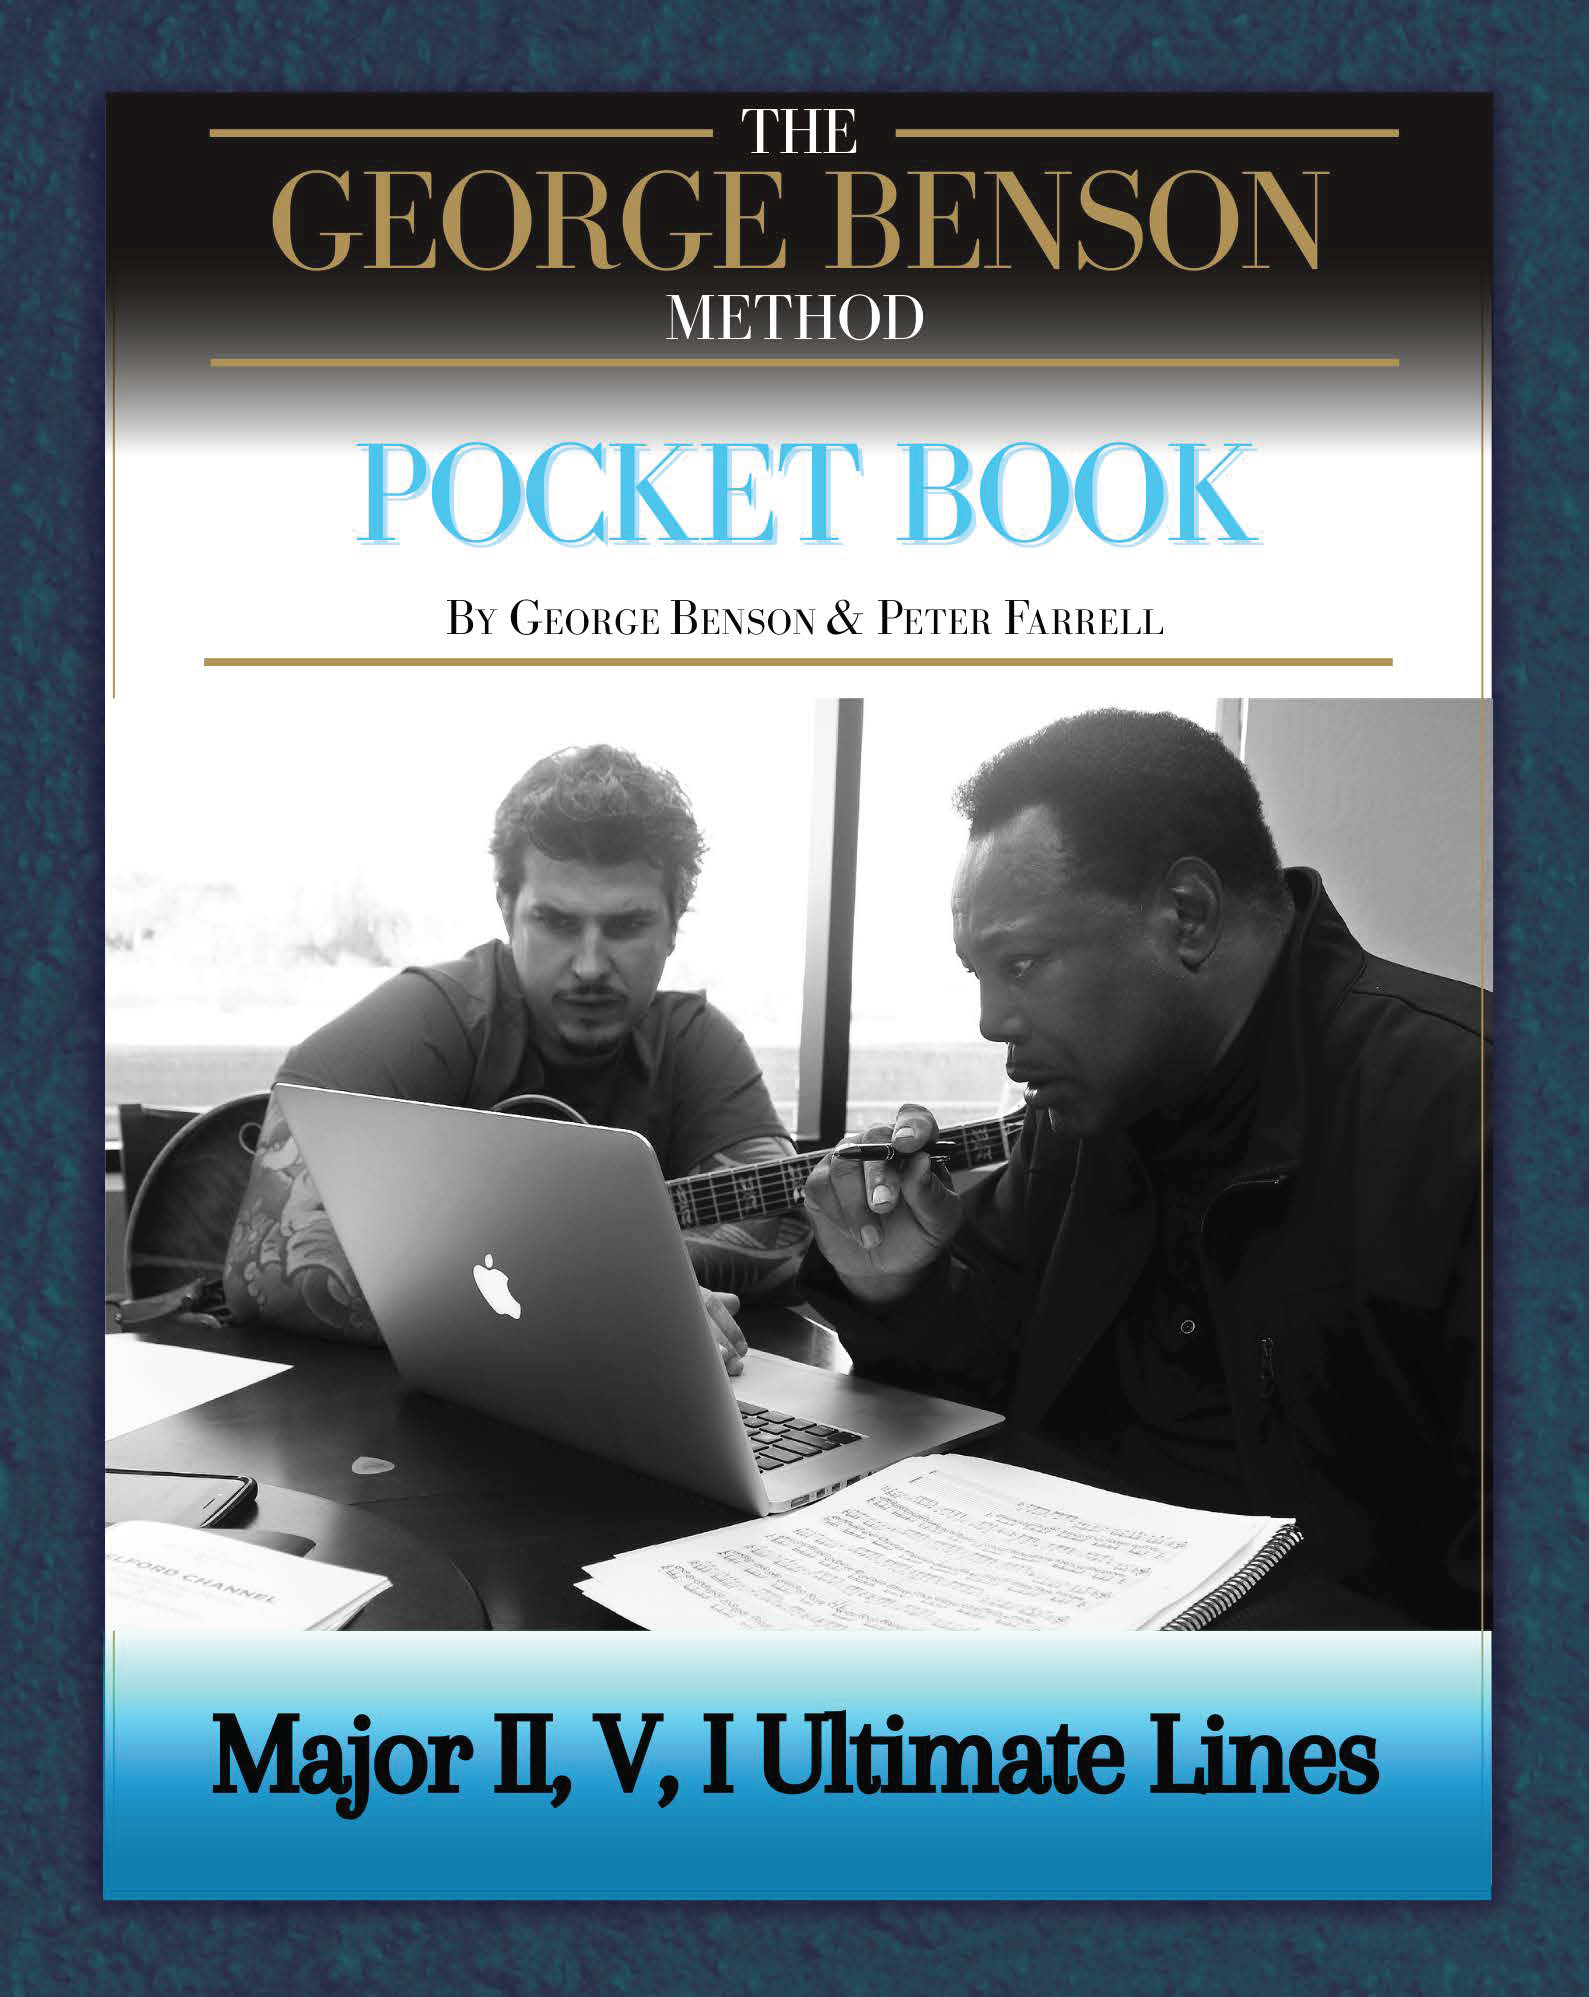 Book Review: The George Benson Method Pocket Book Vol.1 – Major II, V, I  Ultimate Lines by George Benson & Peter Farrell